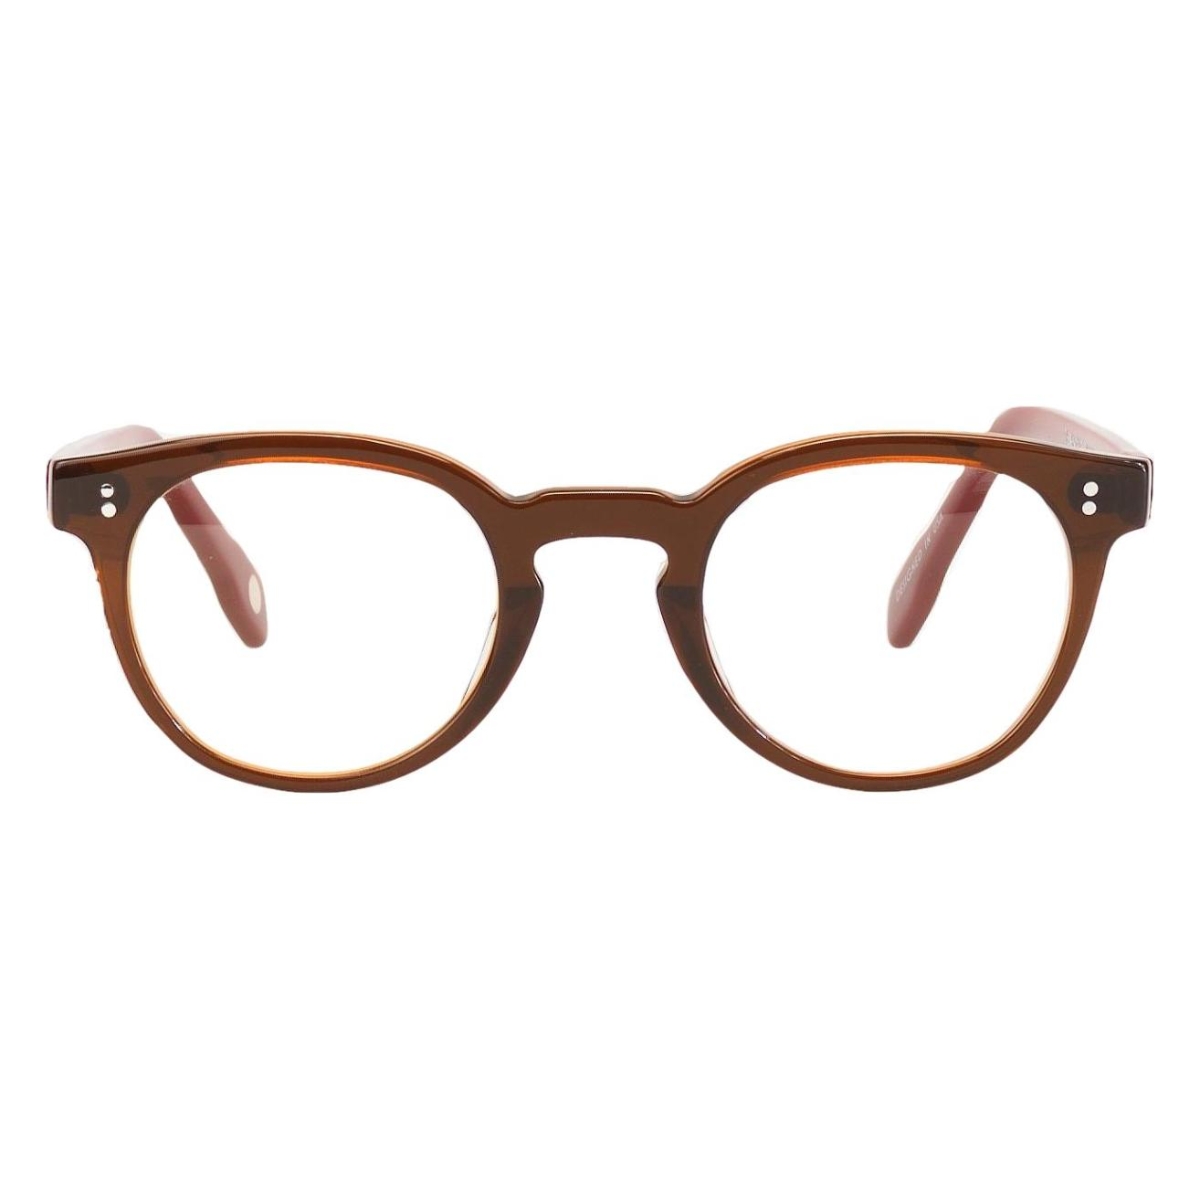 Sugar Specs - The Visionary 02 Brown